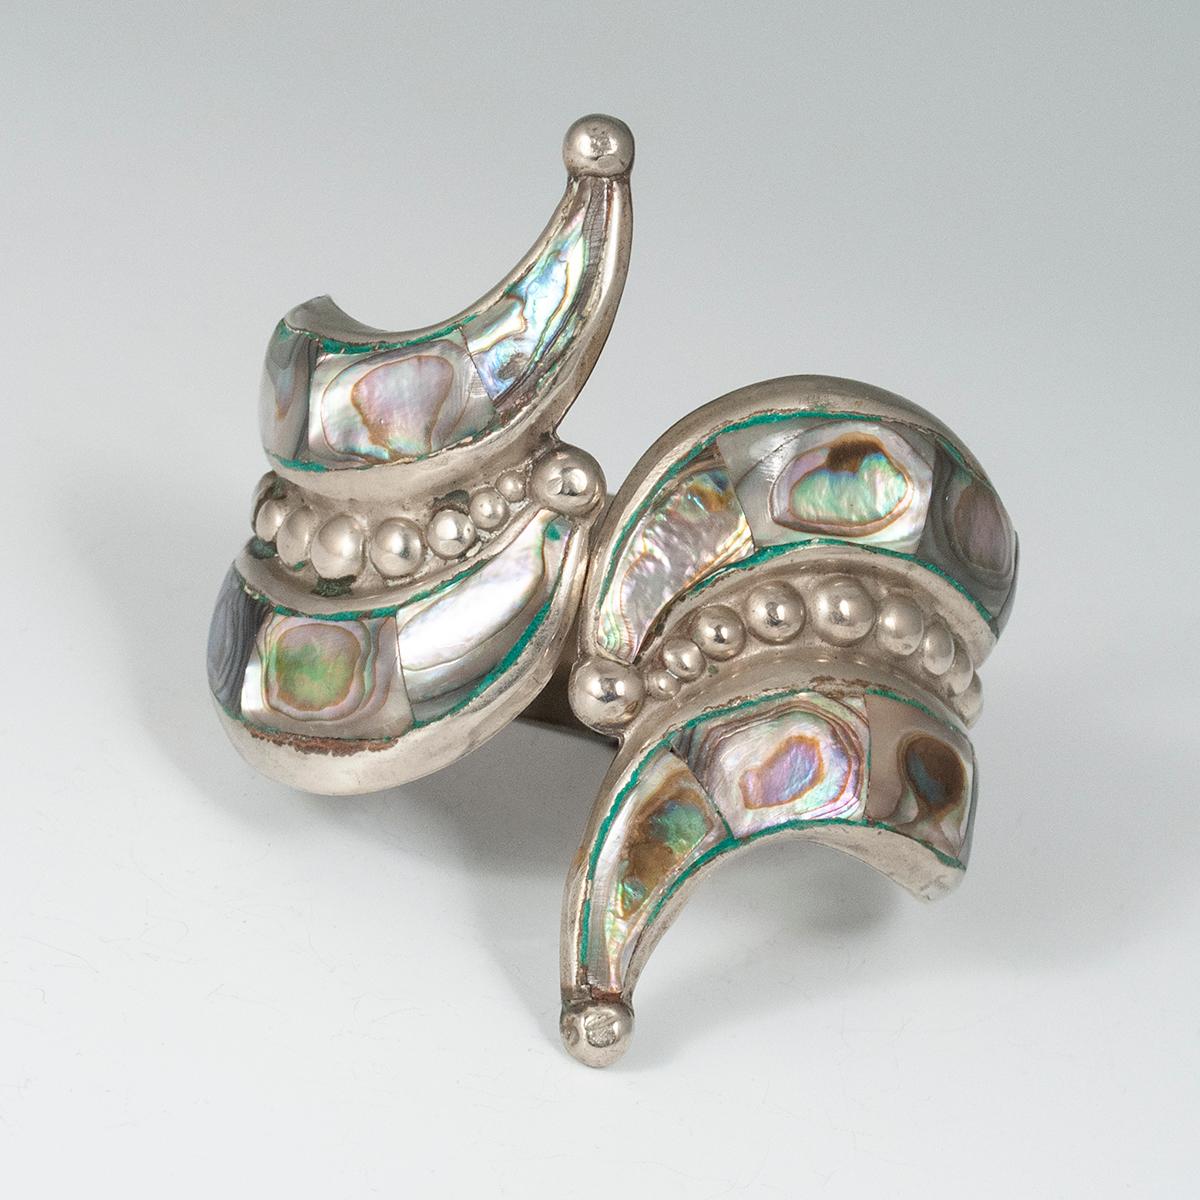 1980s abalone and silver clamper bracelet, Taxco, Mexico

Perfect for summer, this classic abalone clamper bracelet has two rows of inlaid abalone and a central band of graduated raised dots. The hallmark reads Hecho en Mexico ALPACA. The hinge is